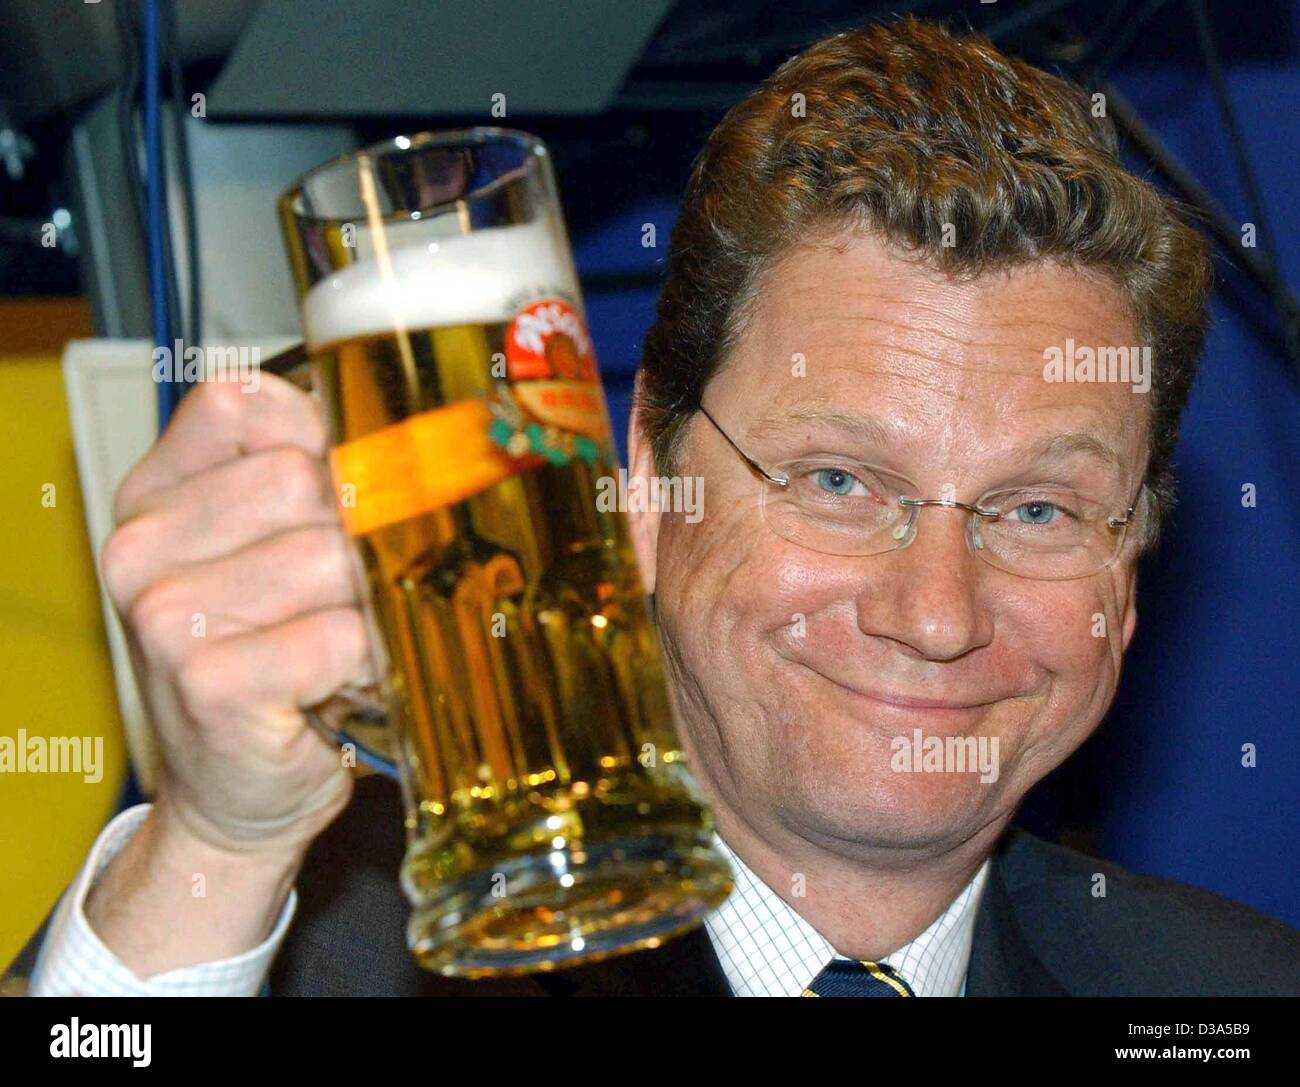 (dpa) - Guido Westerwelle, Chairman of the German liberal party FDP, enjoys a beer after a speech at a party meeting in Passau, Germany, 13 February 2002. Westerwelle has been nominated as the FDP's chancellor candidate in this year's general elections on 22 September, which makes him the first chan Stock Photo